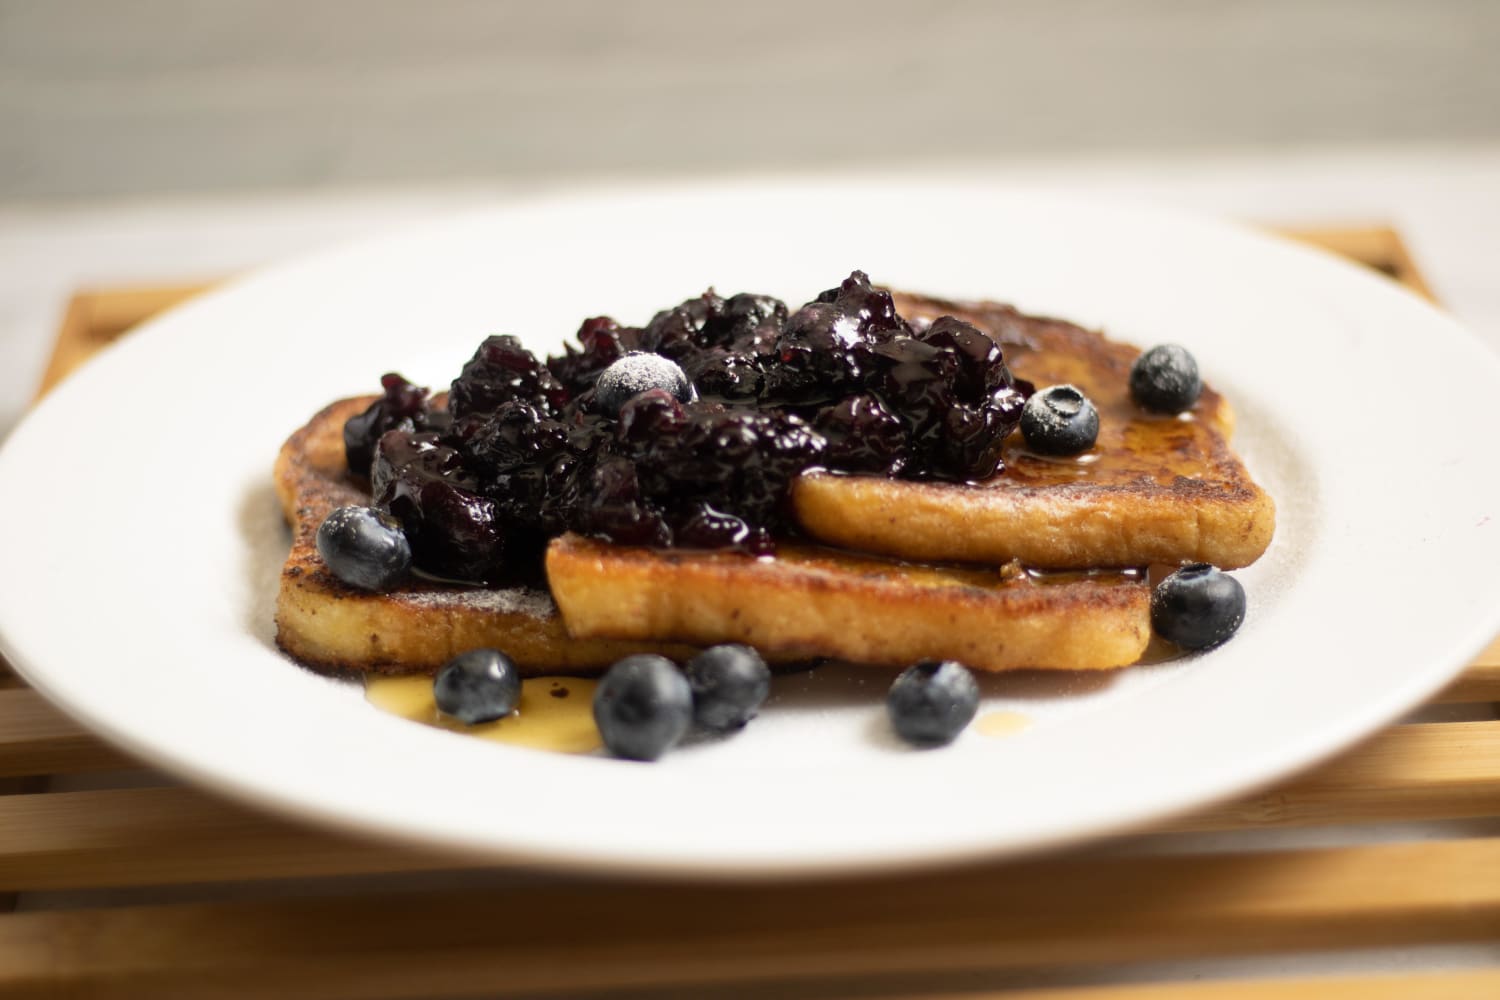 Vegan French Toast with Blueberry Compote! My first experience making vegan French toast!